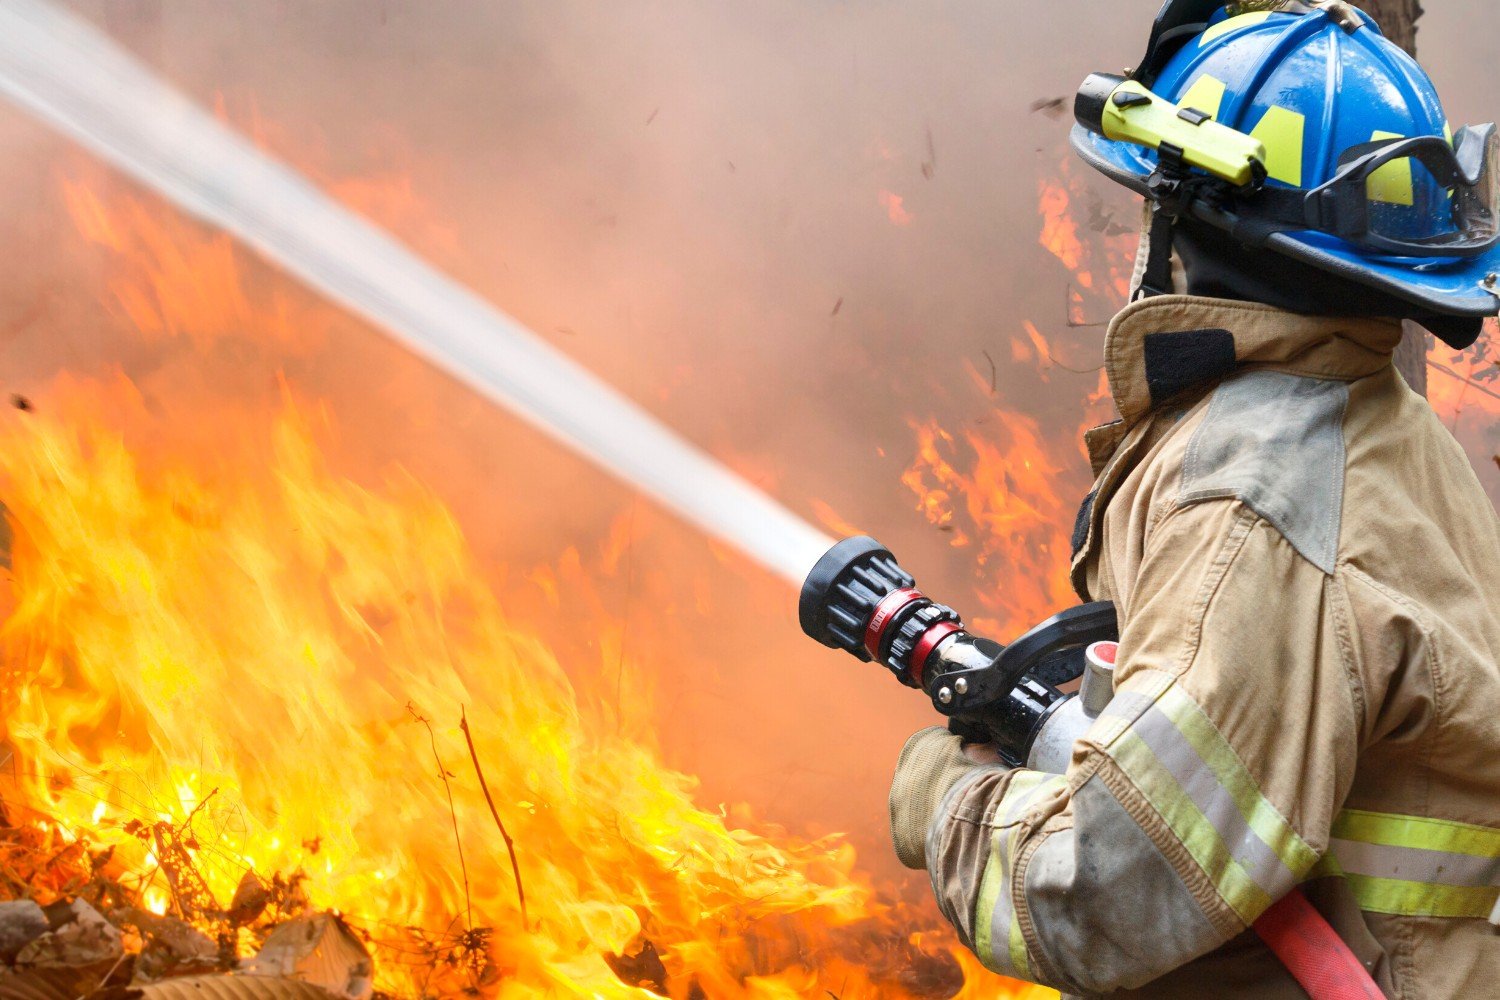 300 Questions to Ask a Firefighter